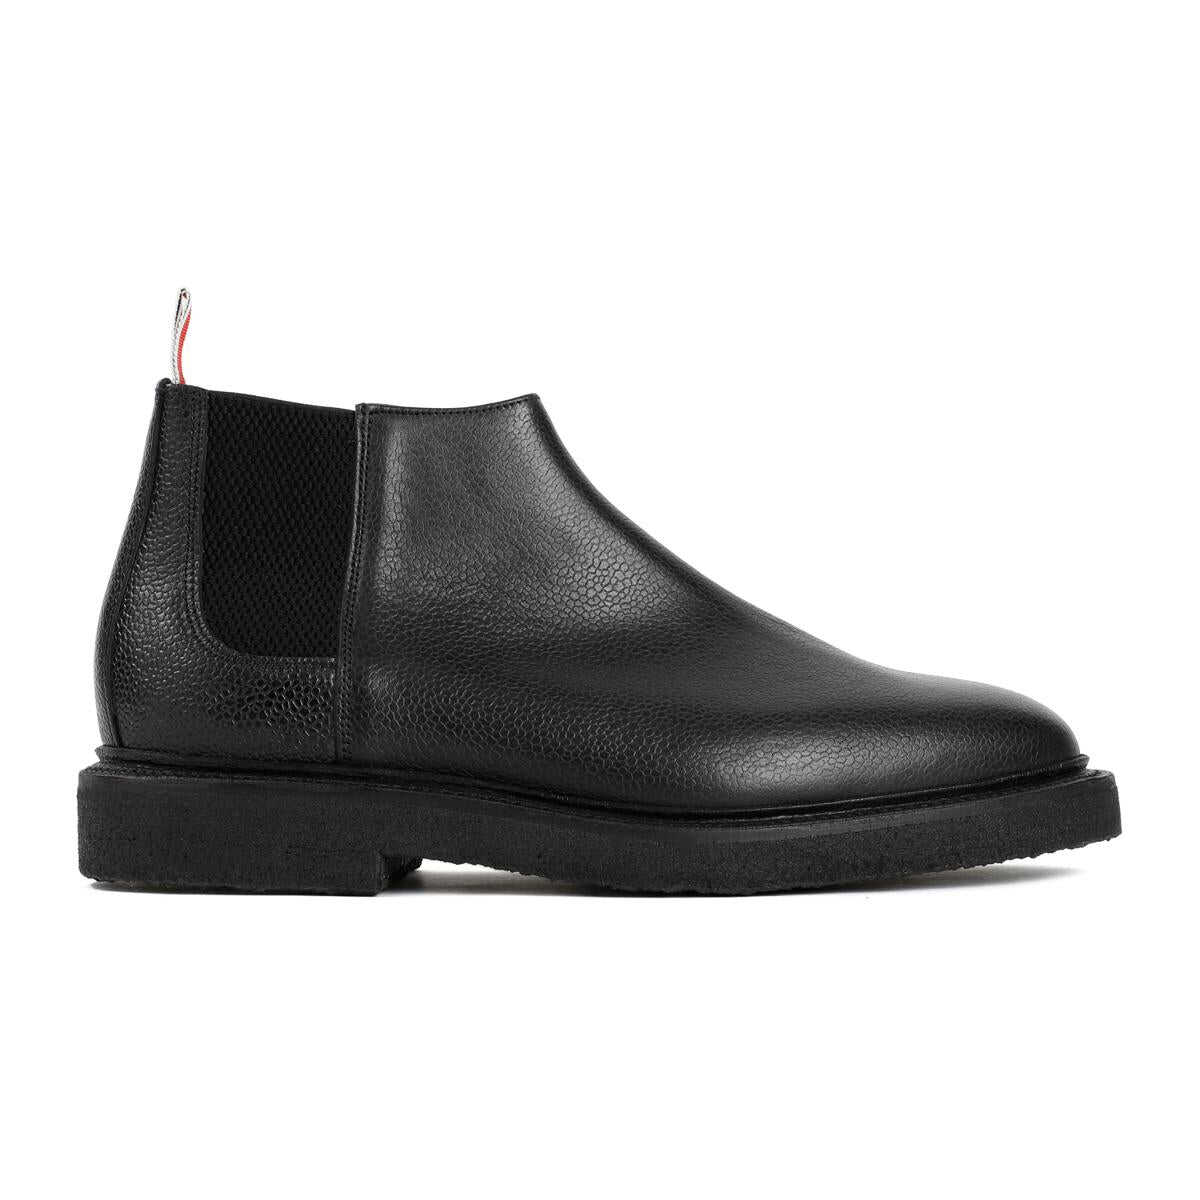 Thom Browne THOM BROWNE LEATHER MID TOP CHELSEA BOOTS SHOES BLACK